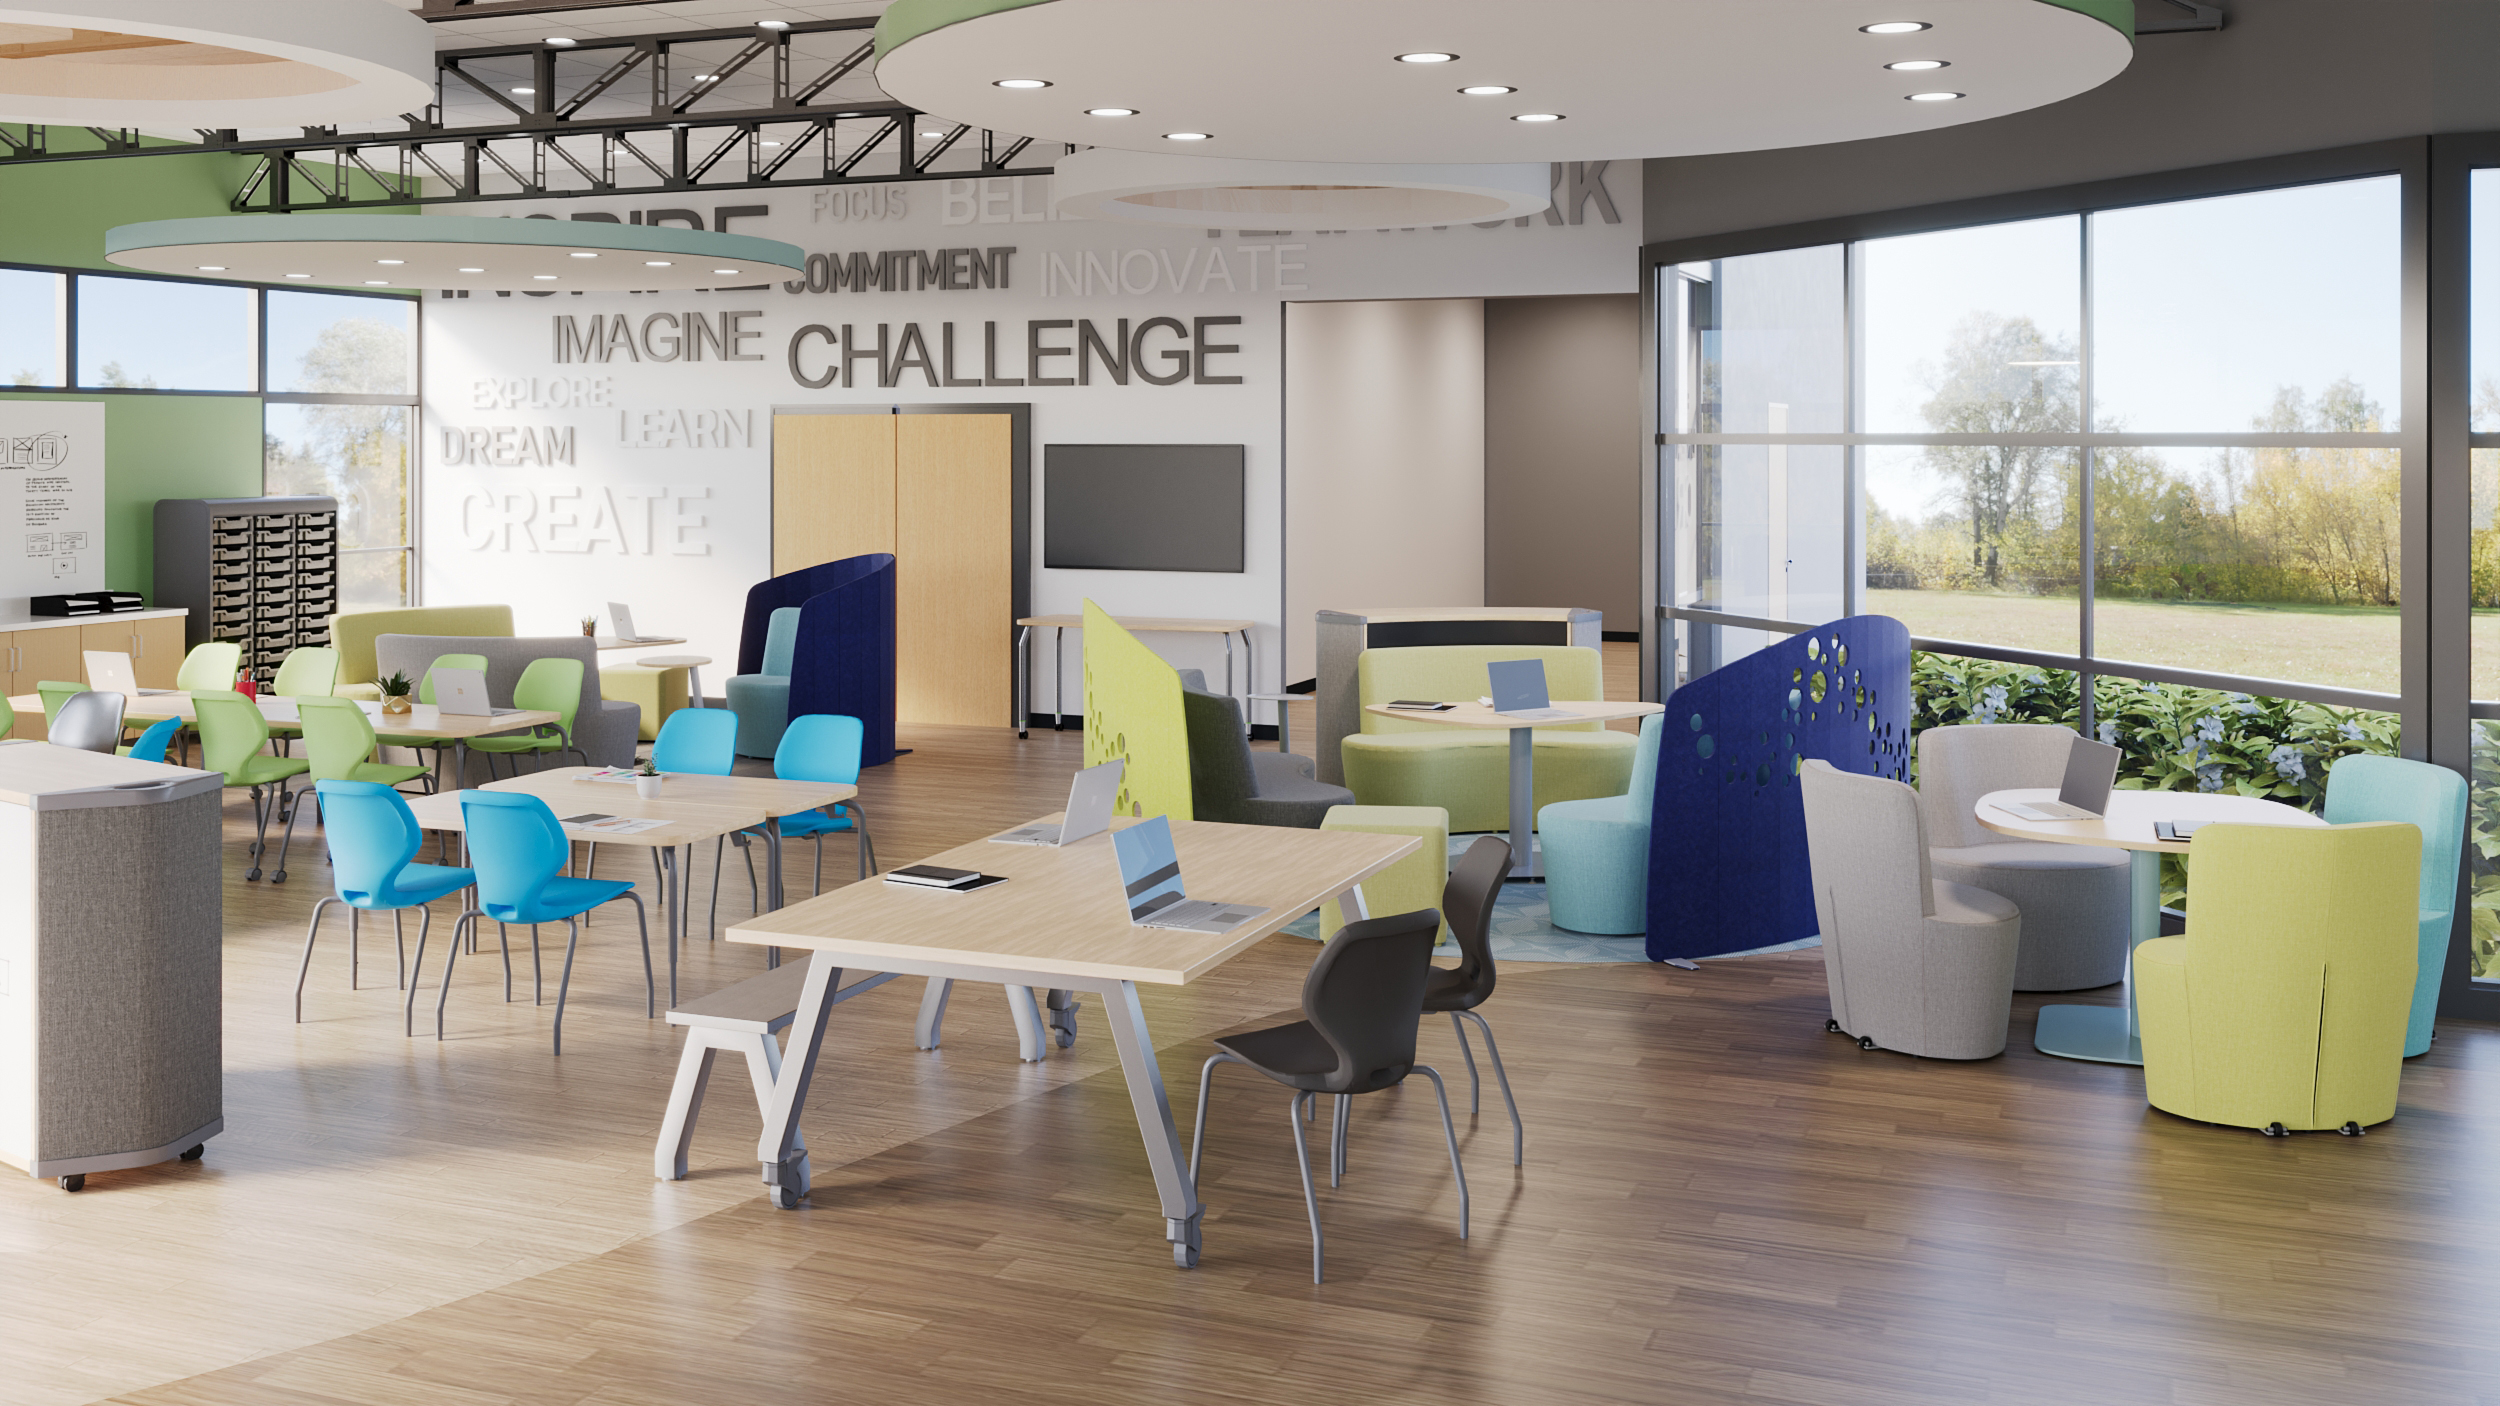 169357 - Smith Systems - Study Space_Green Room Flowform Learning Lounge 1